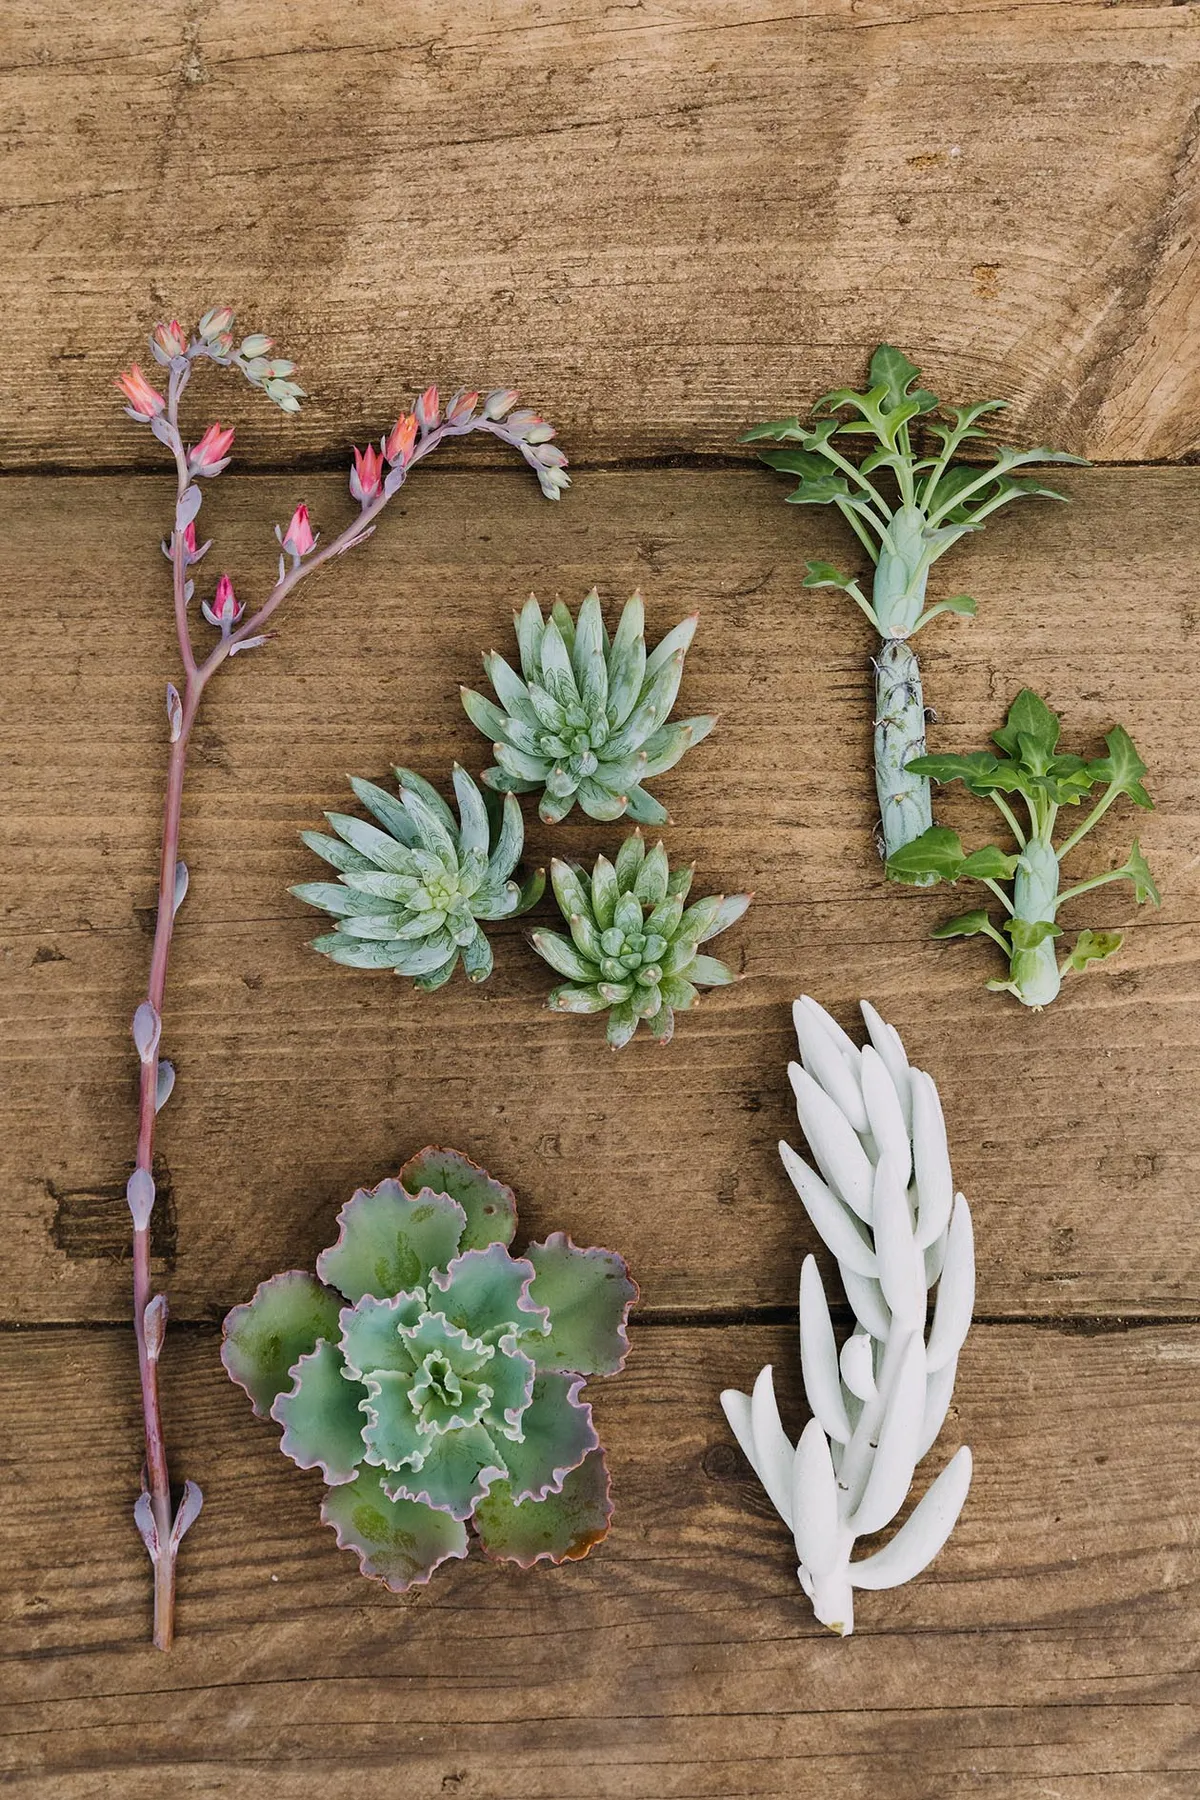 Succulents for a winter pot planting display